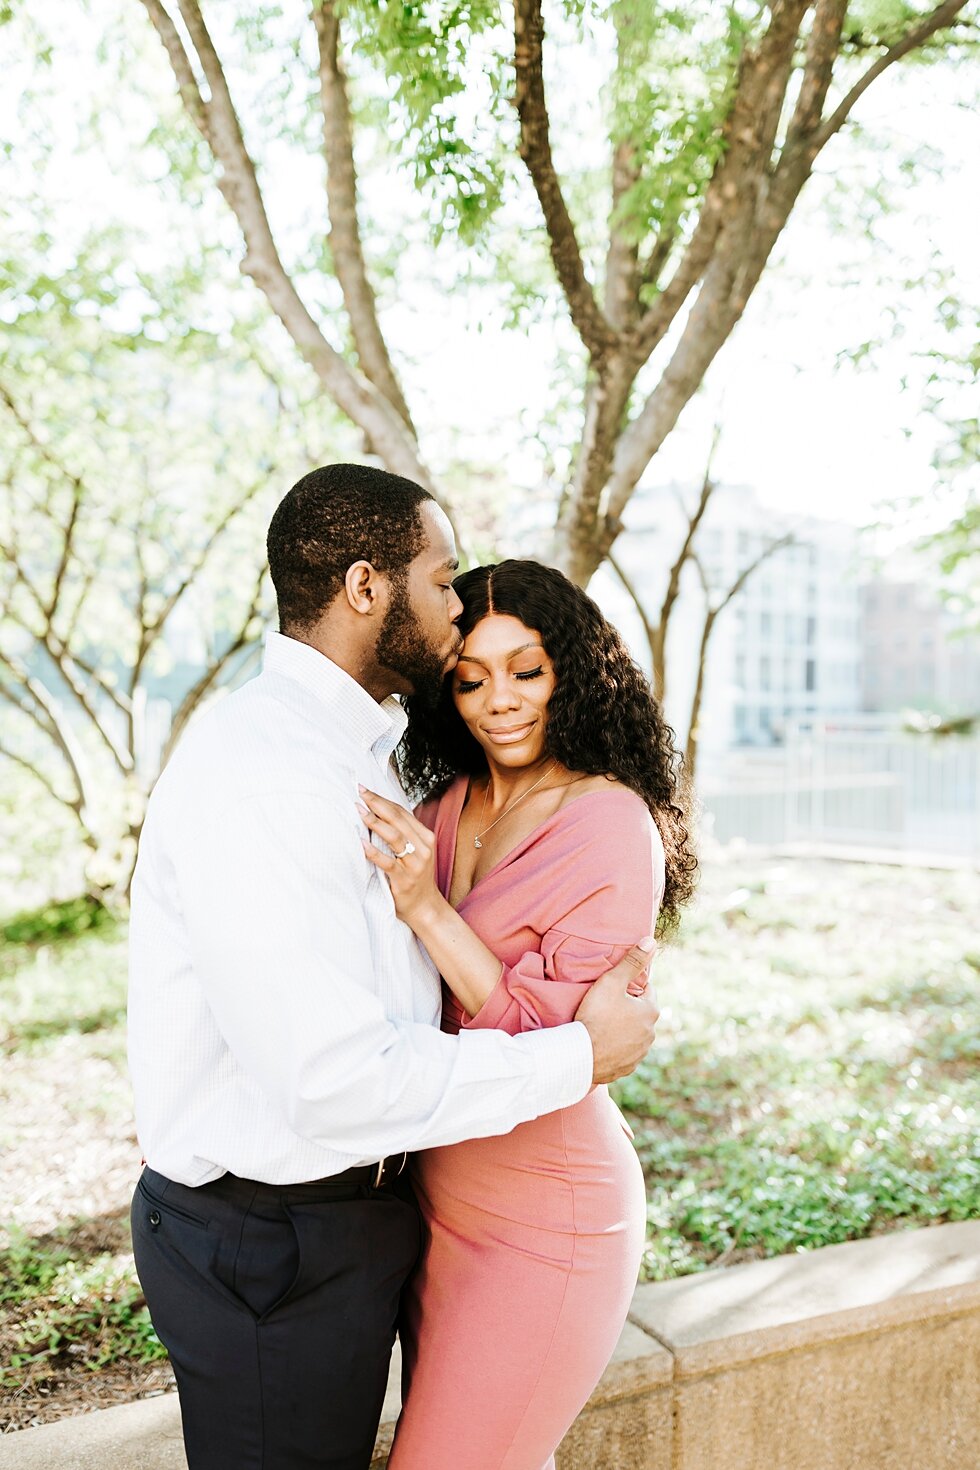  Sweet kiss on the forehead as this African American couple urban engagement pictures in downtown Louisville Muhammad Ali center and belvedere #engaged #muhumadalicenter #belvedere #shesaidyes #engaged #padbl #photographyanddesignbylauren #urban #cit